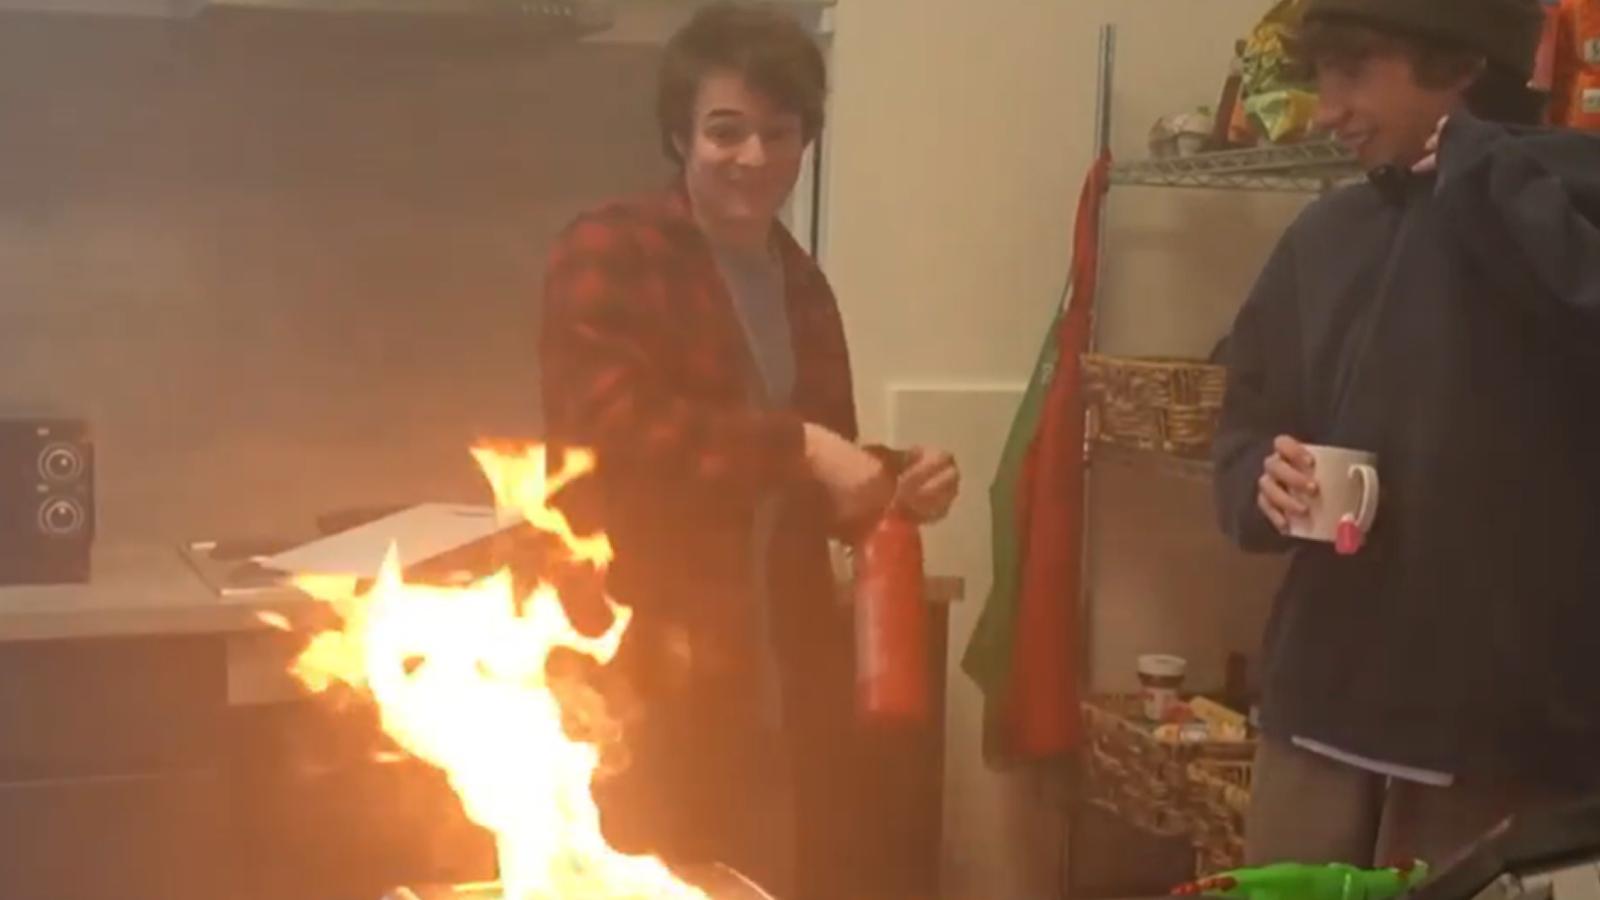 Twitch streamer Tubbo sets his toaster on fire in chaotic clip